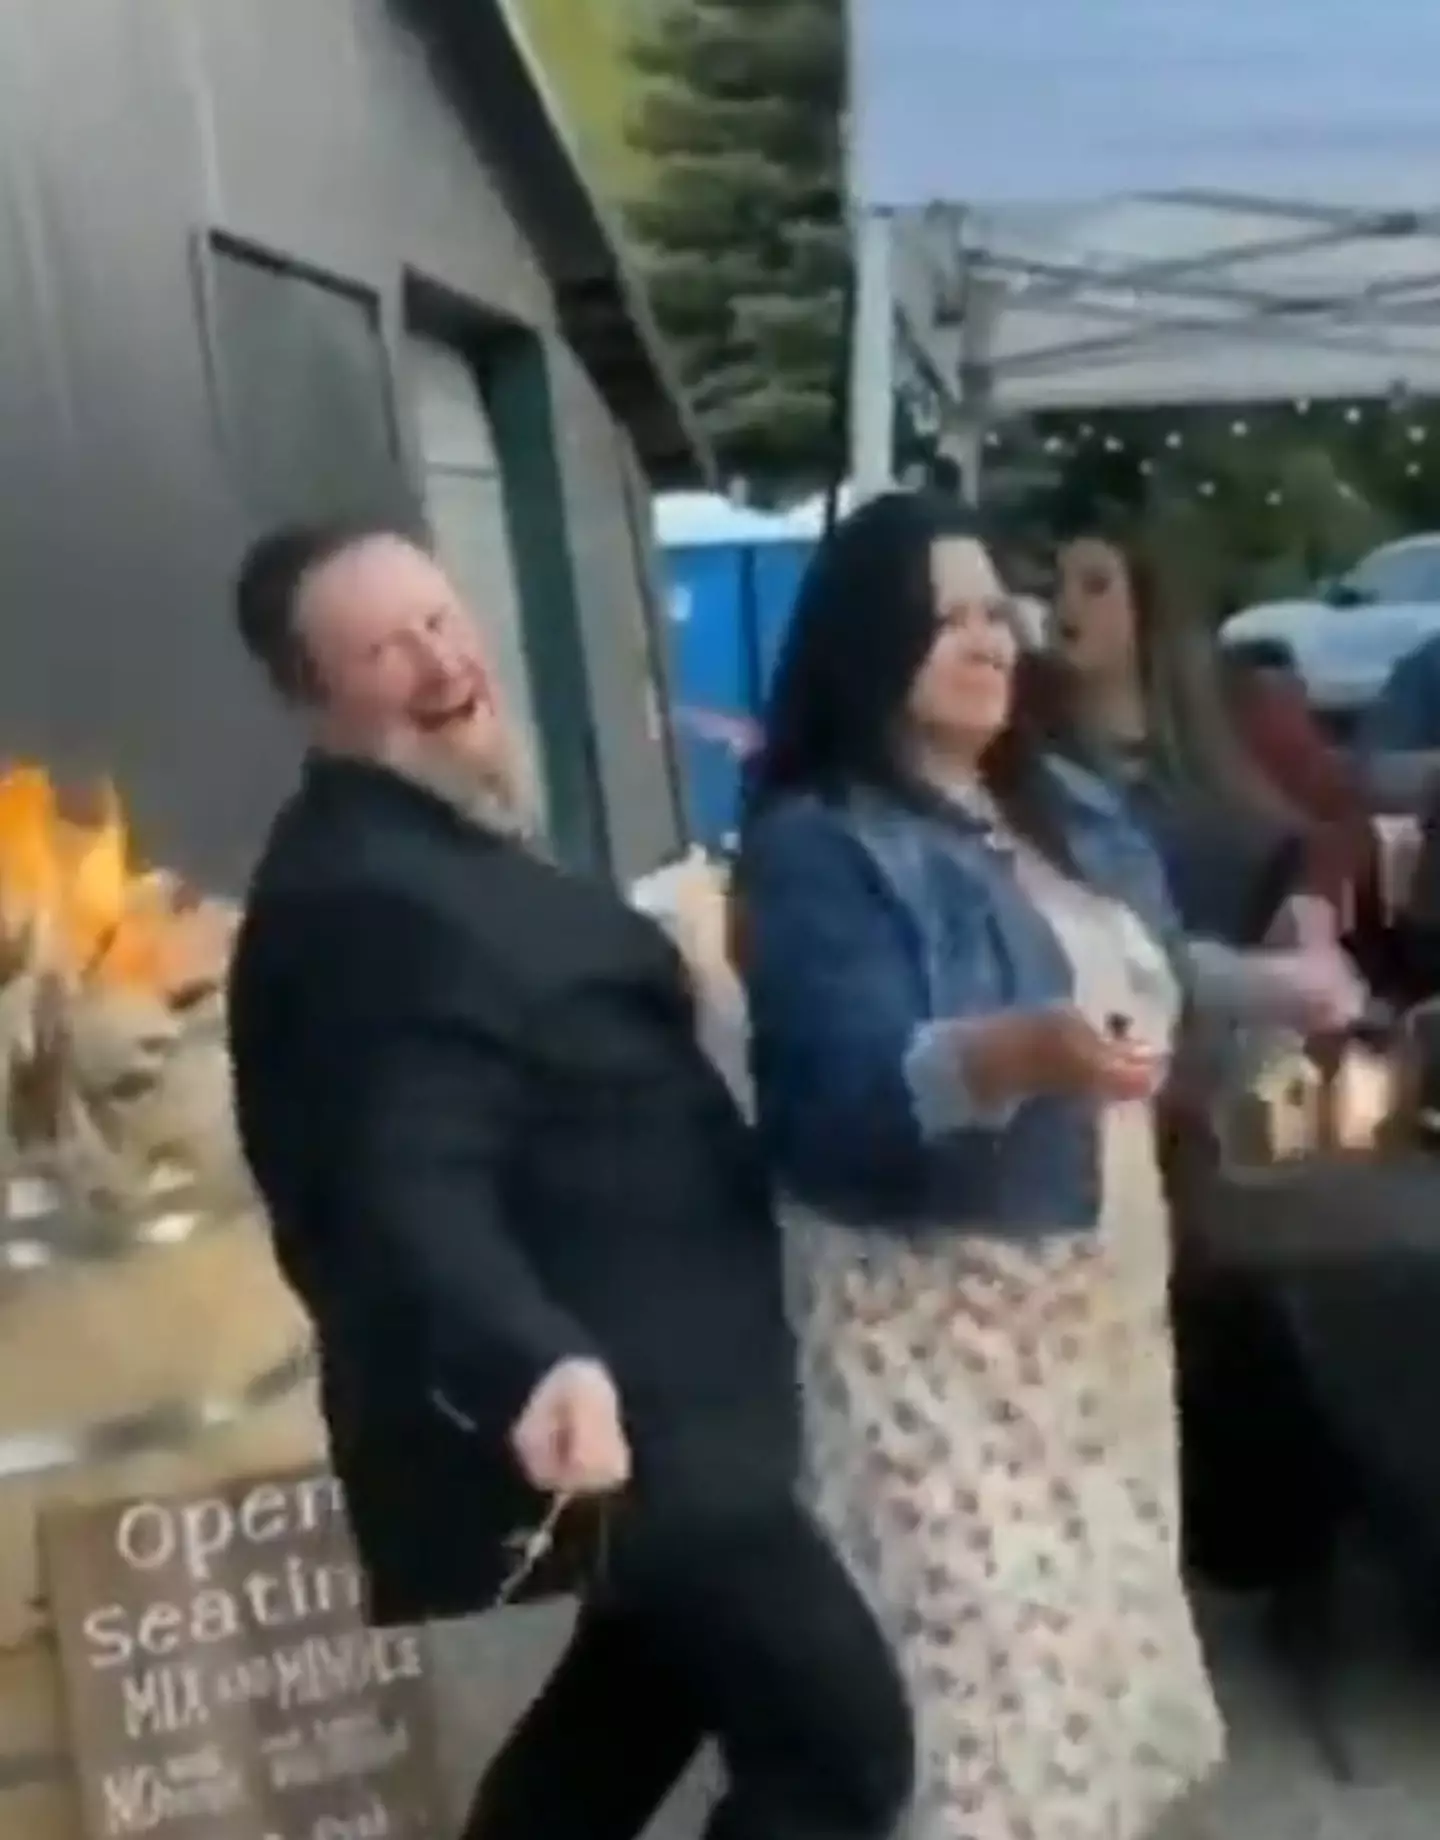 A guest's overzealous dance moves almost caused a wedding venue to go up in flames.